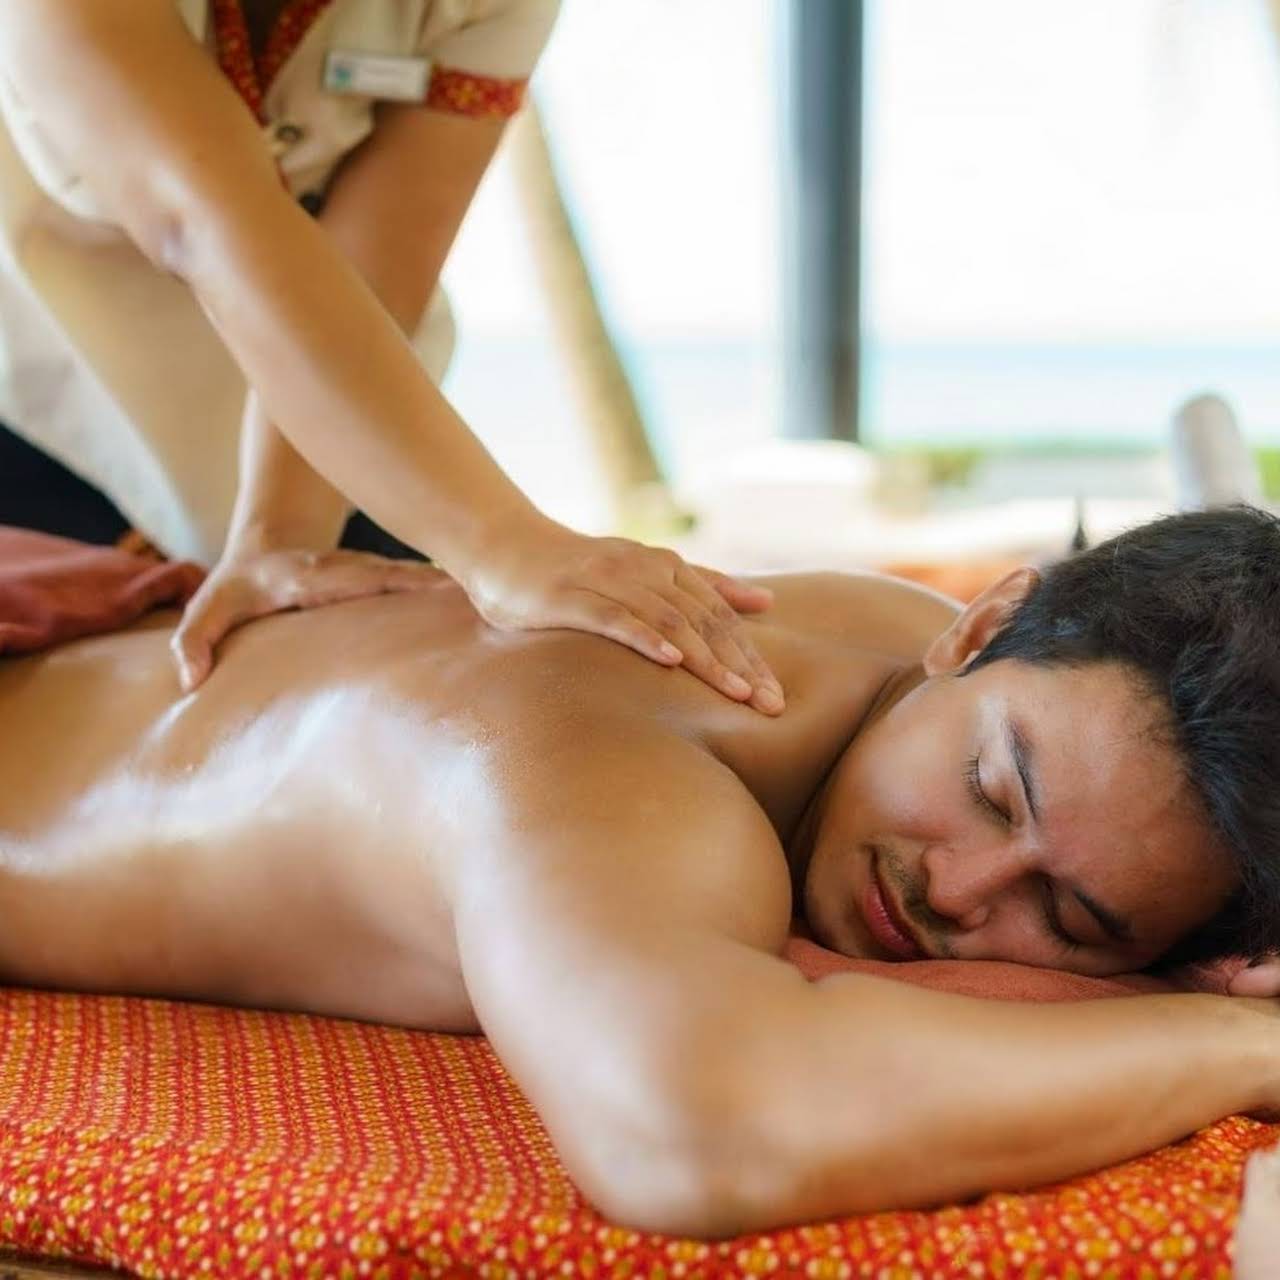 Body Massage by Female Railway colony Jaipur 7568798332,Jaipur,Services,Free Classifieds,Post Free Ads,77traders.com